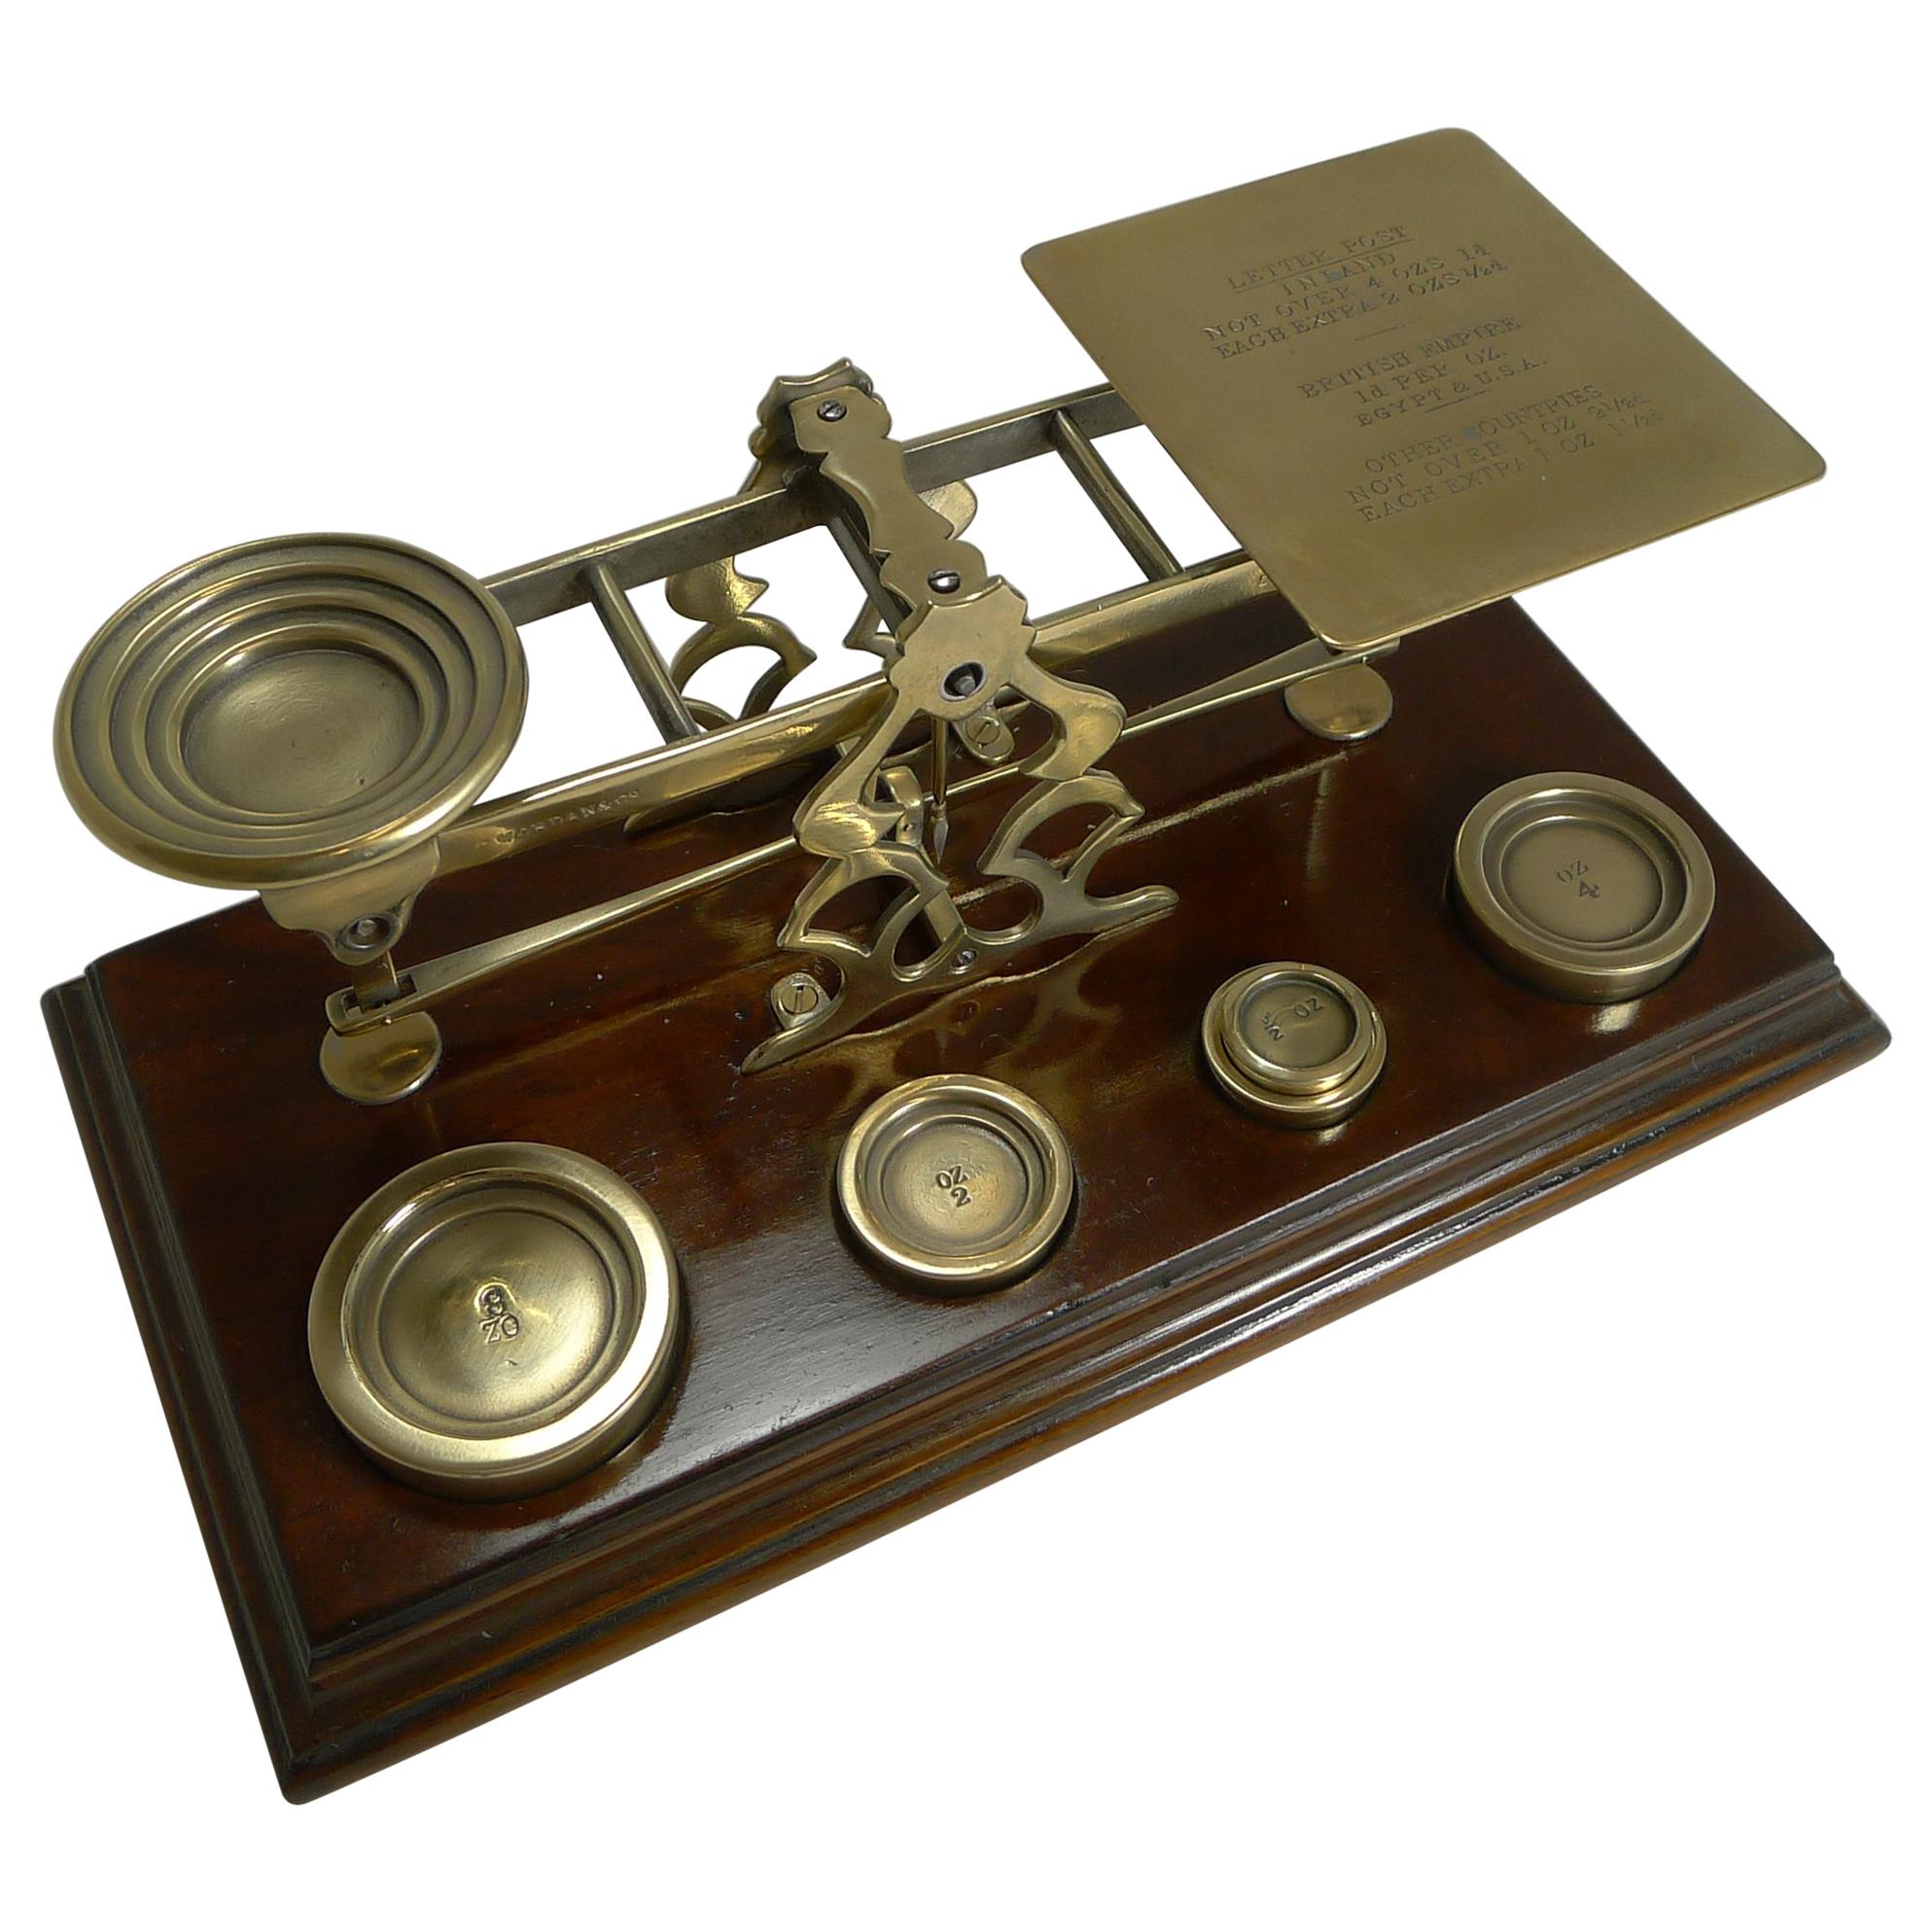 Antique English Mahogany & Brass Letter Scales, S. Mordan & Co., London